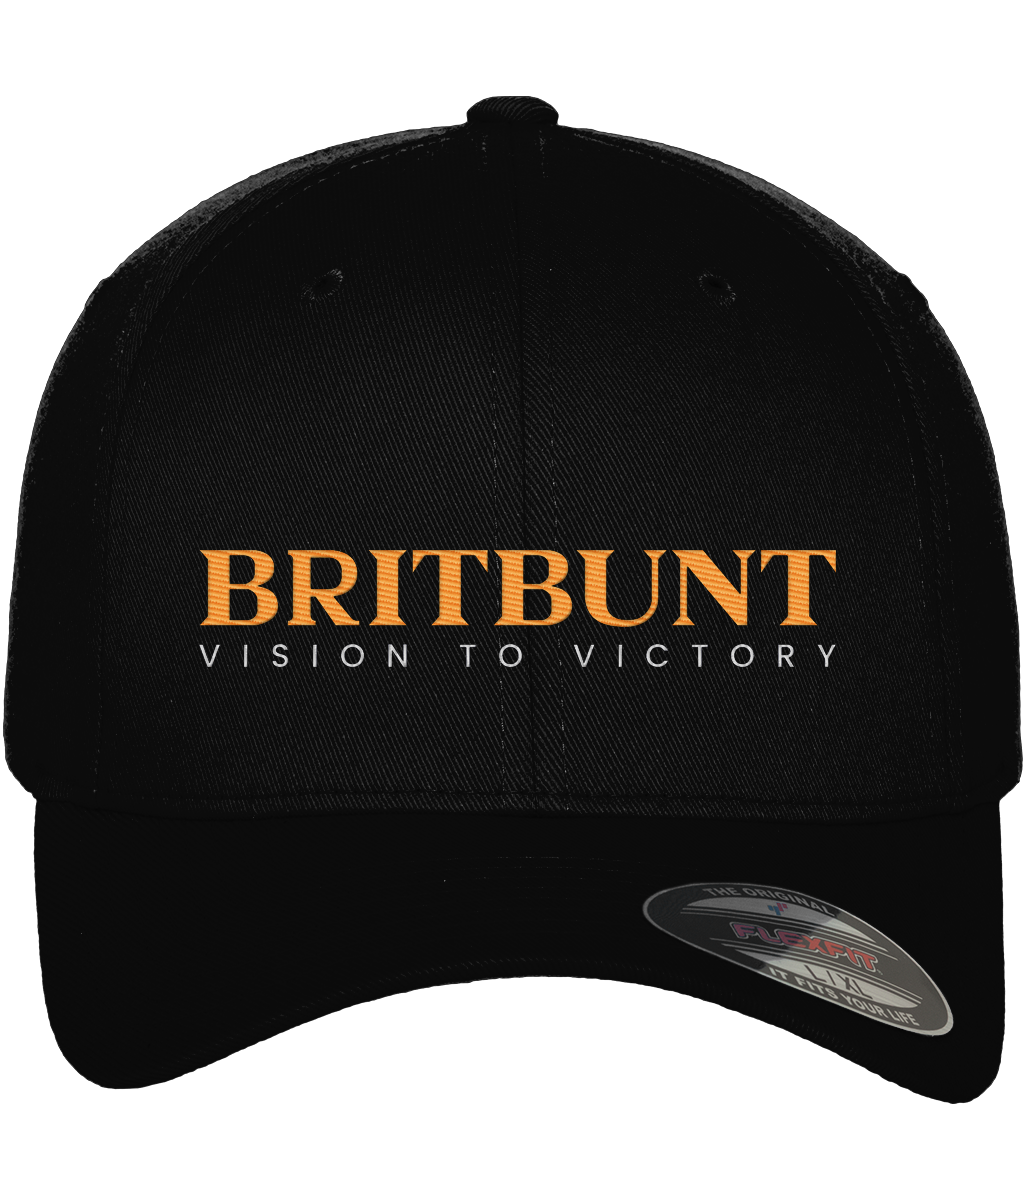 Britbunt Iconic Fitted Baseball Cap